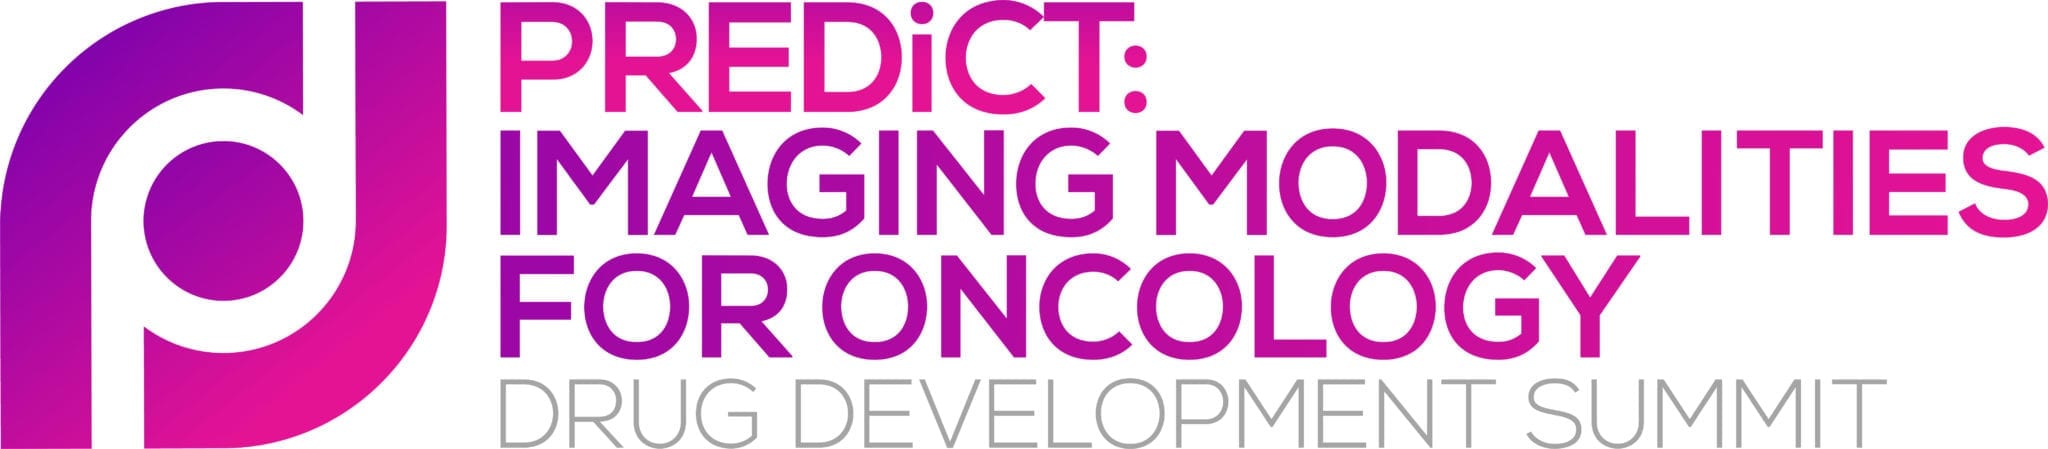 HW191203-PREDiCT-Imaging-Modalities-for-Oncology-Drug-Development-Summit-logo-FINAL-003-scaled